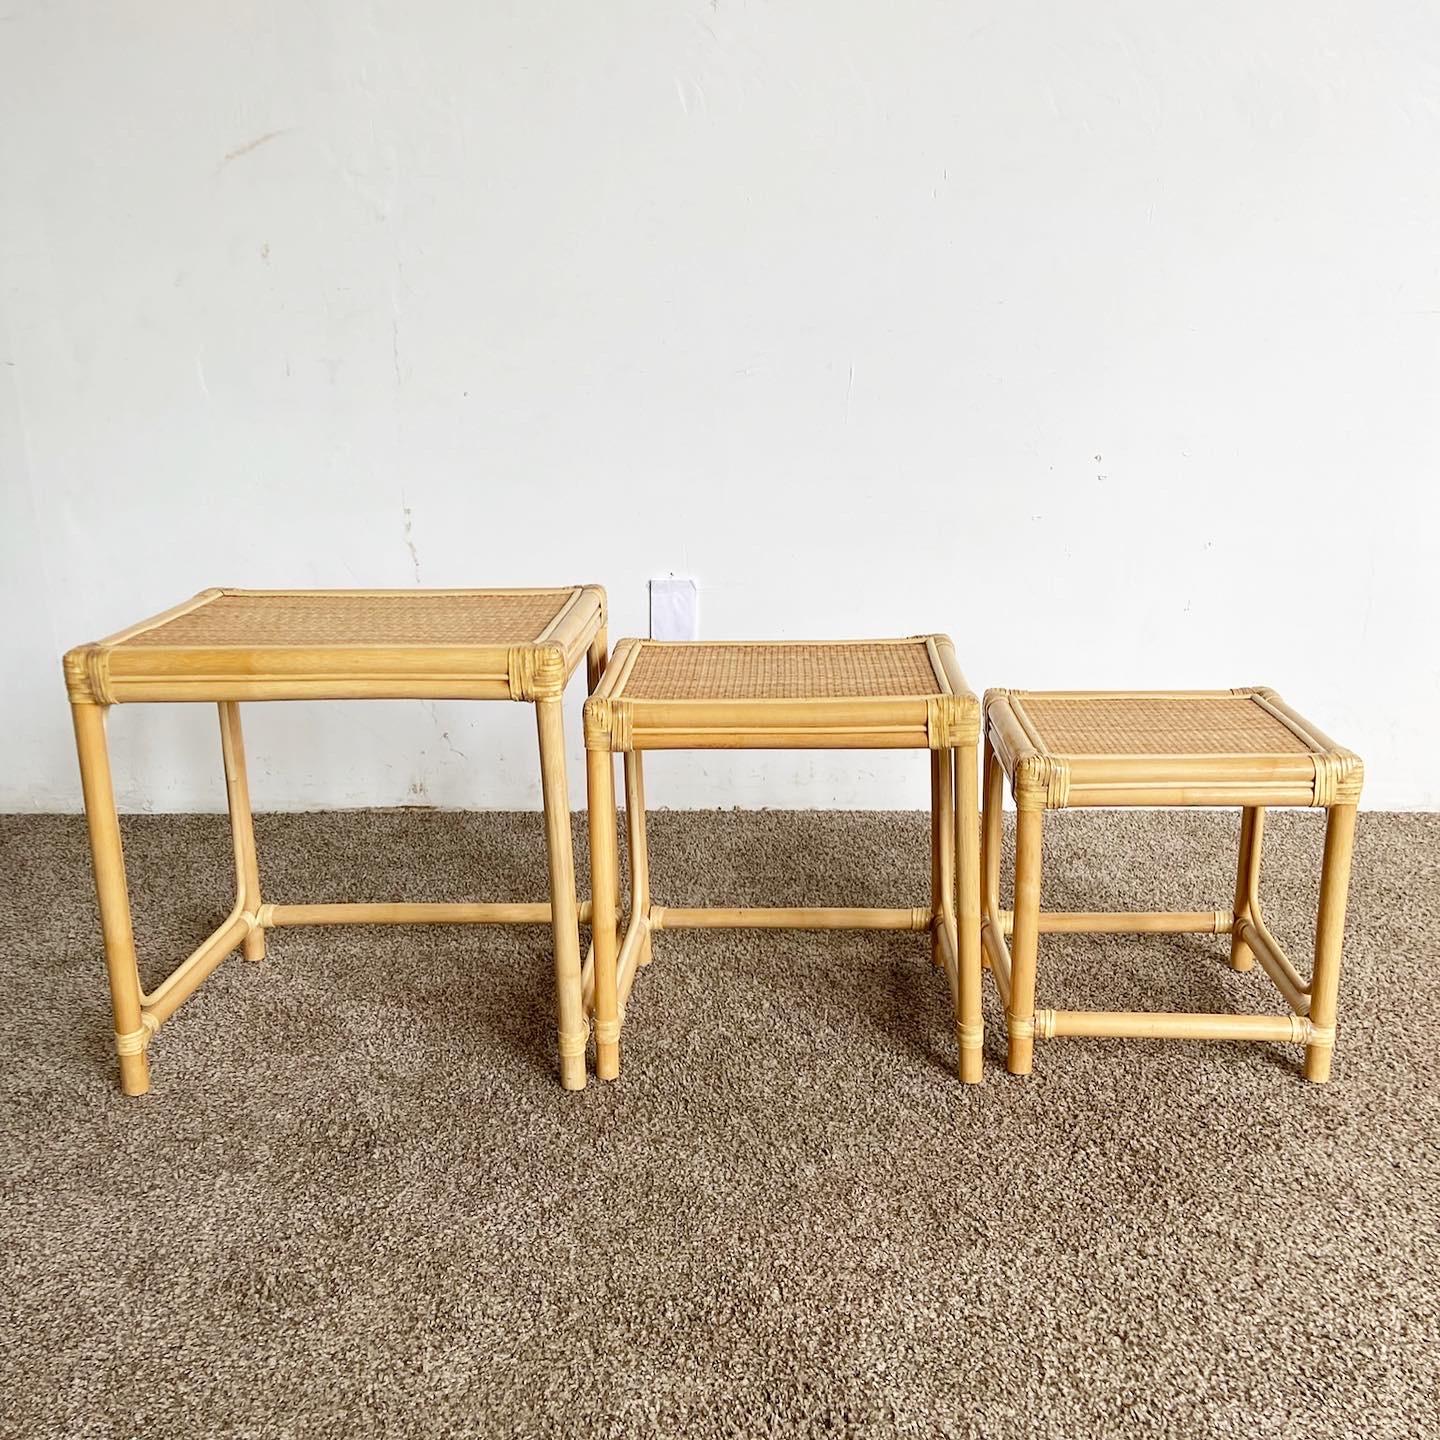 Boho Chic Bamboo Rattan and Wicker Nesting Tables, Set of 3 In Good Condition For Sale In Delray Beach, FL